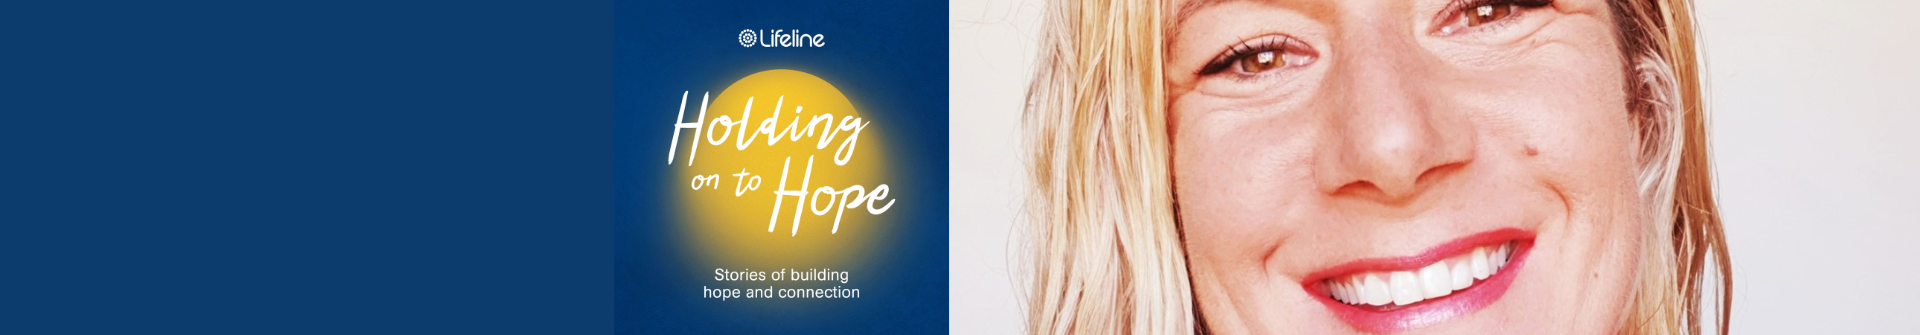 Holding onto hope podcast lizzies story